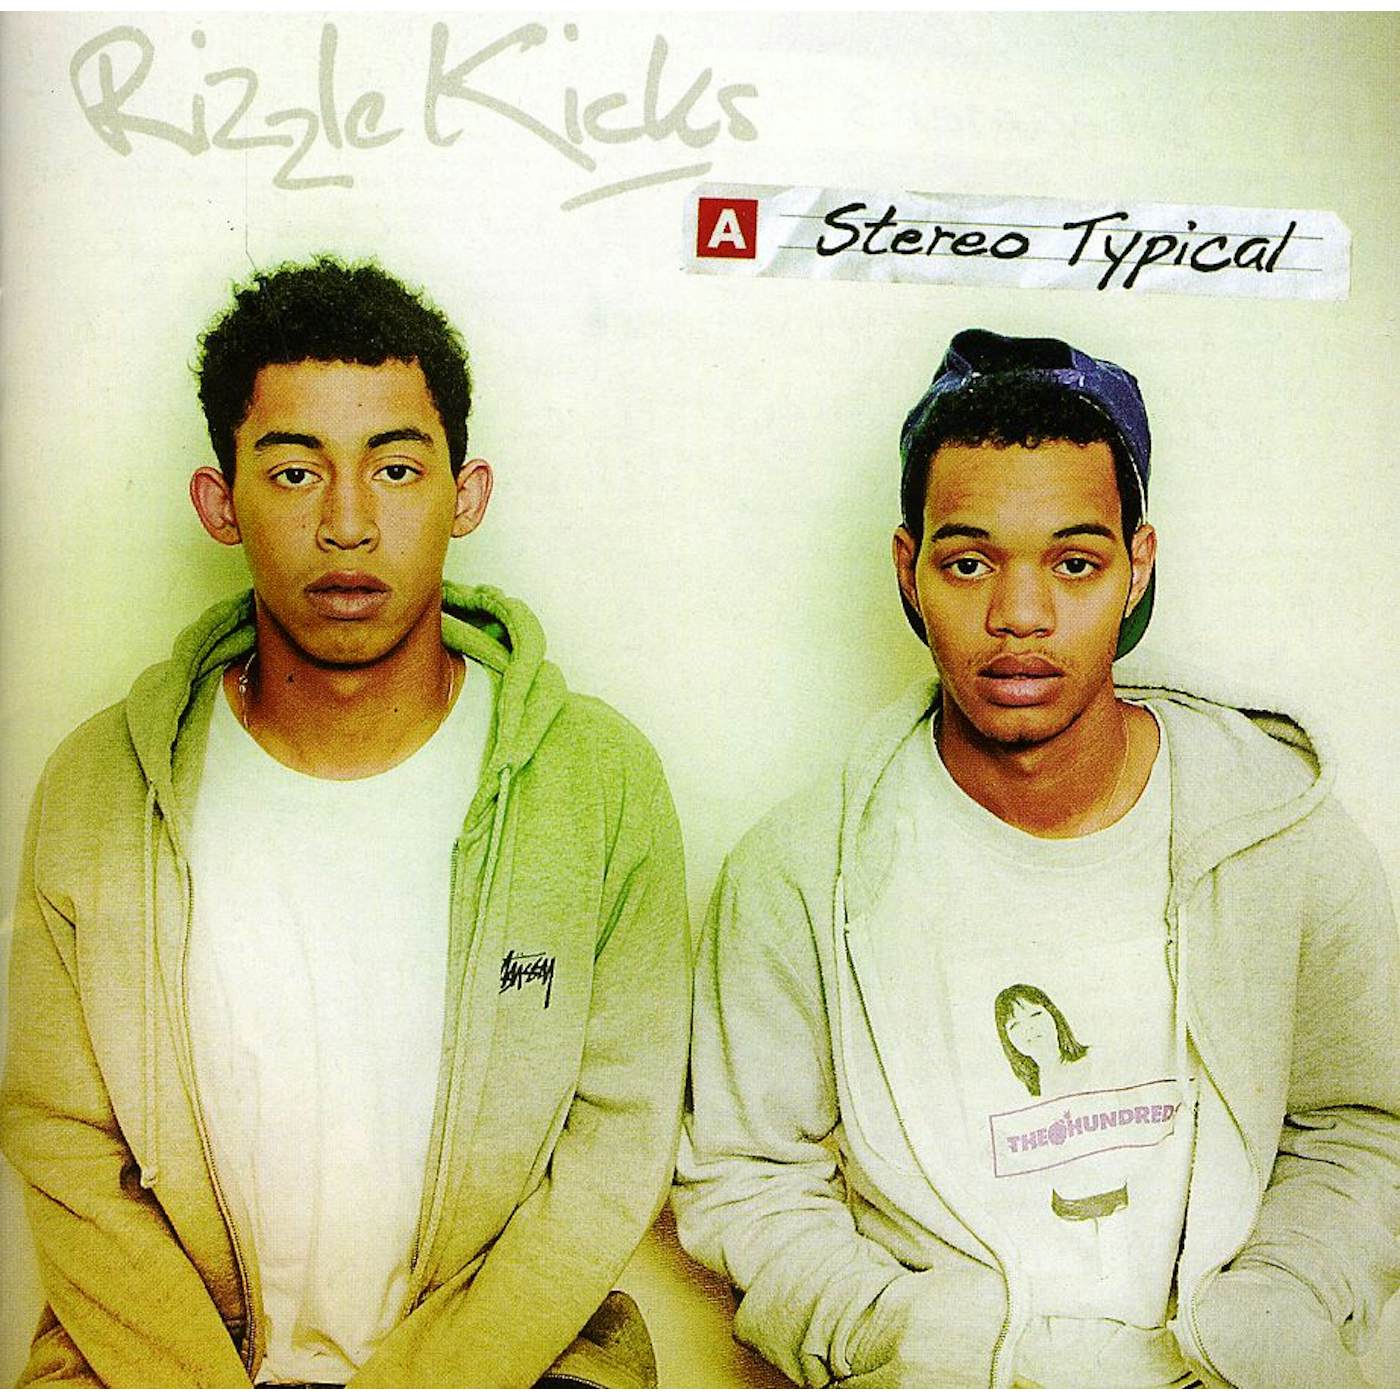 Rizzle Kicks STEREO TYPICAL CD